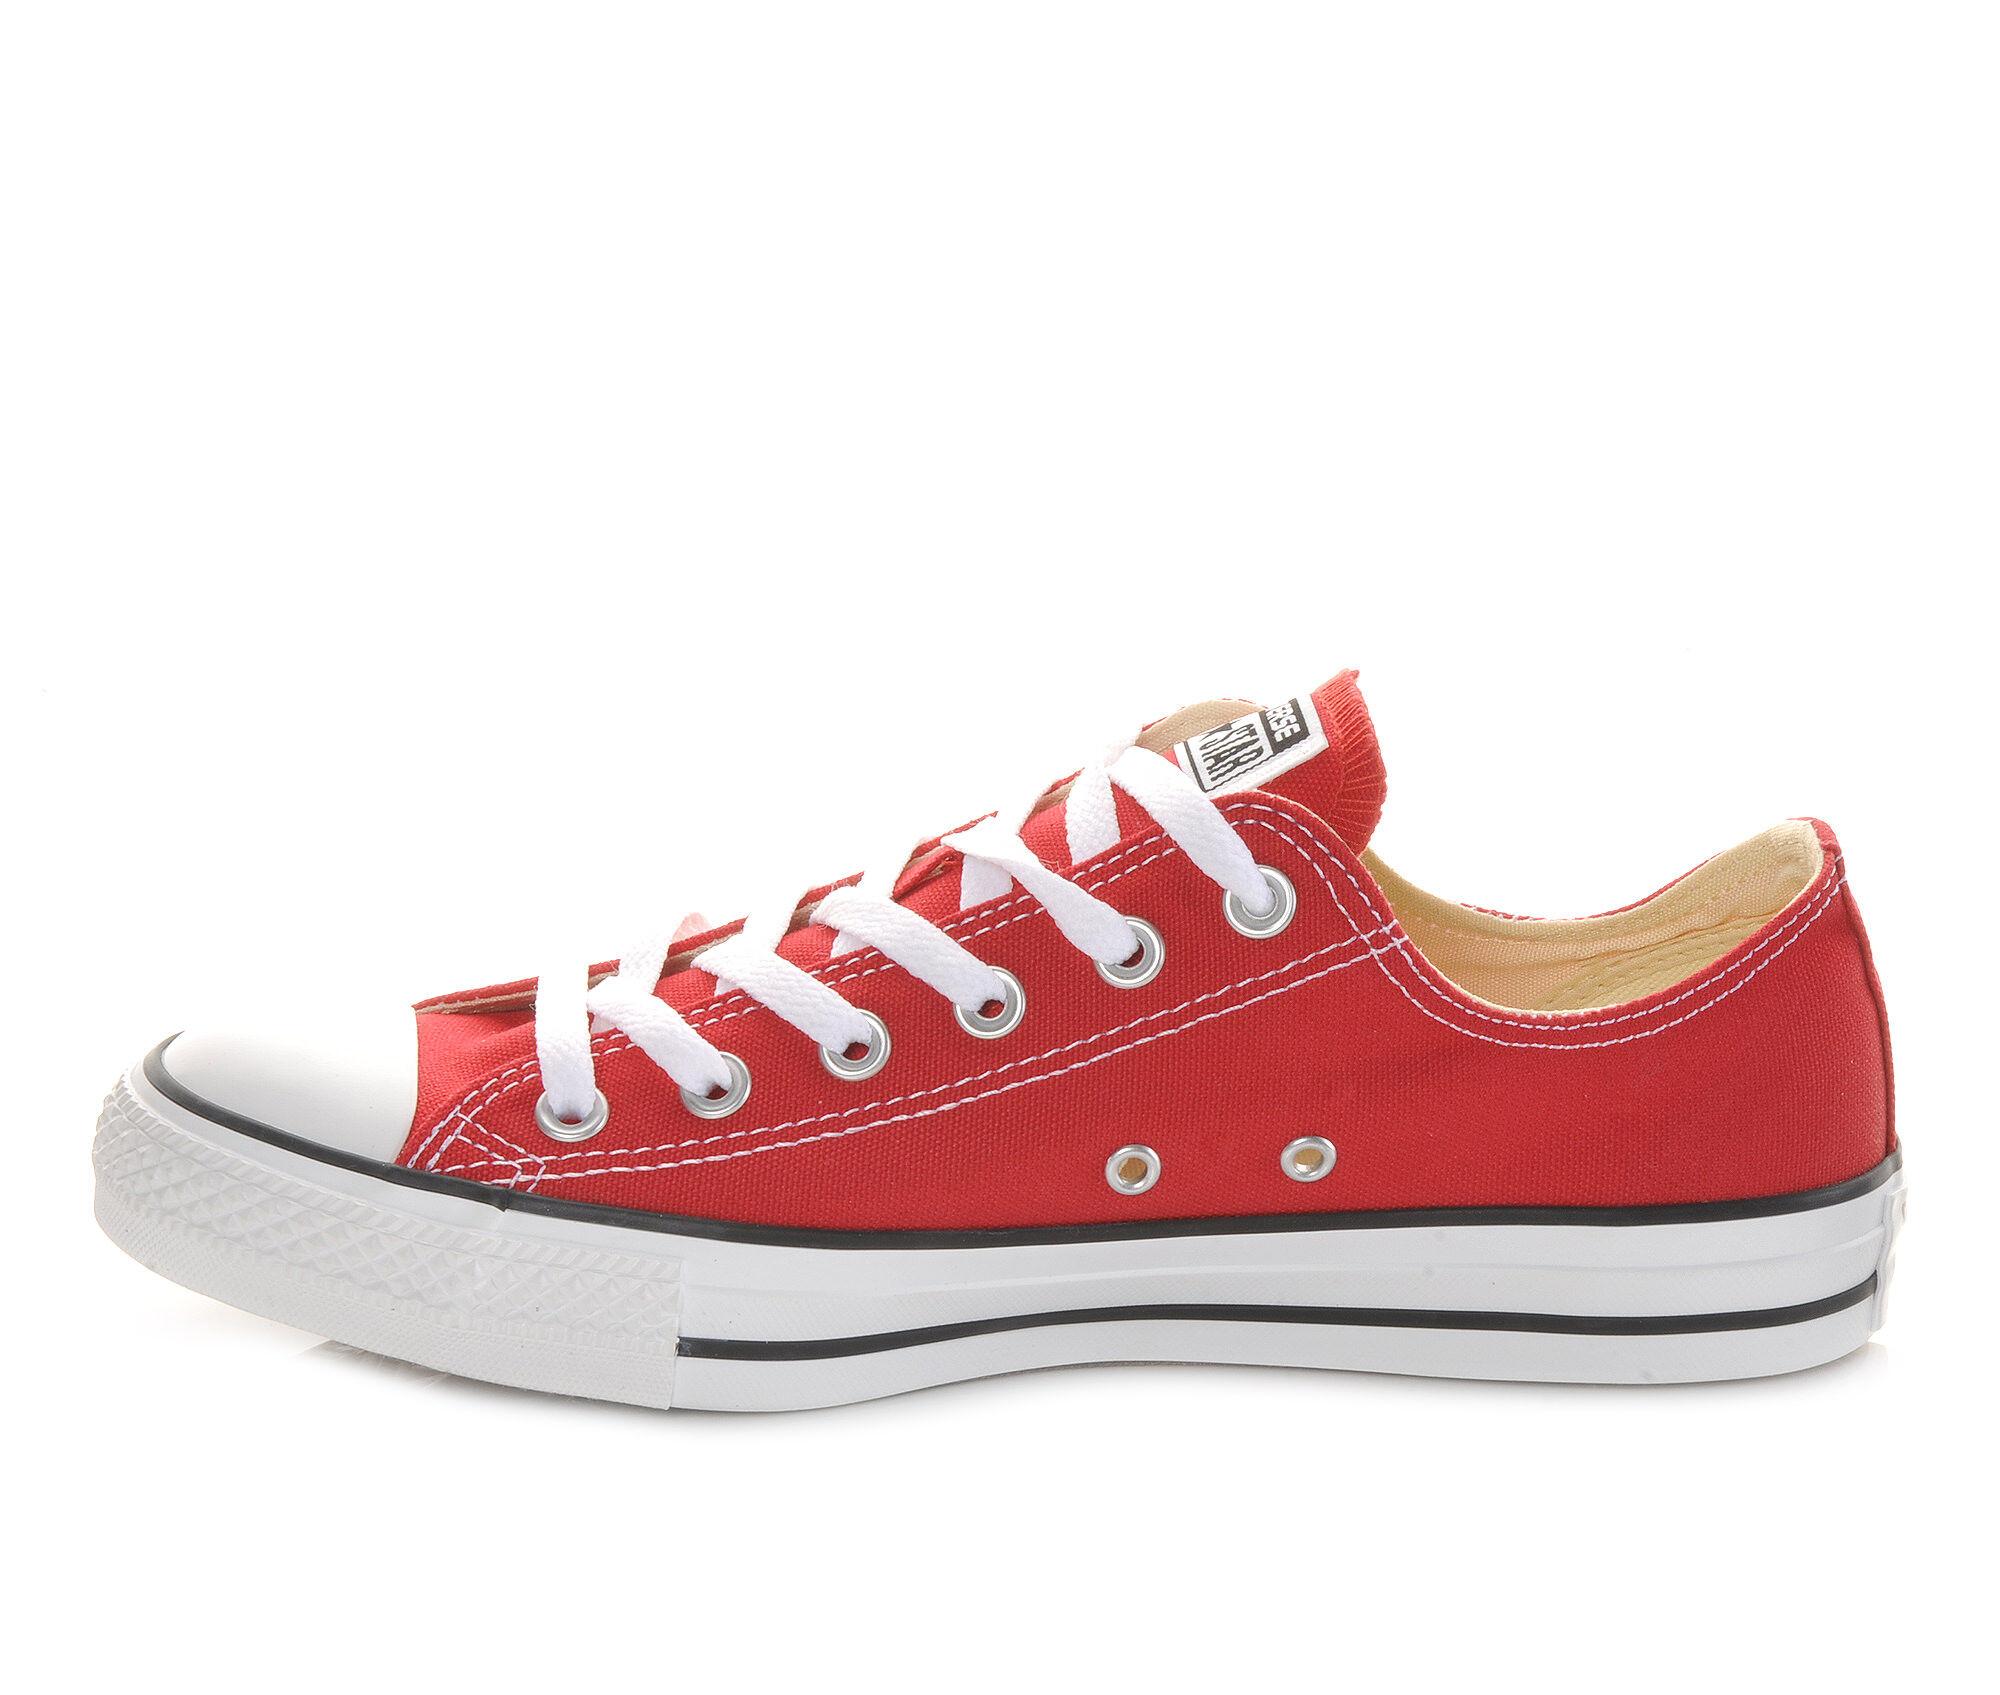 Converse Chuck Taylor All Star Canvas Ox Core Athletic Shoe in Red - Lyst